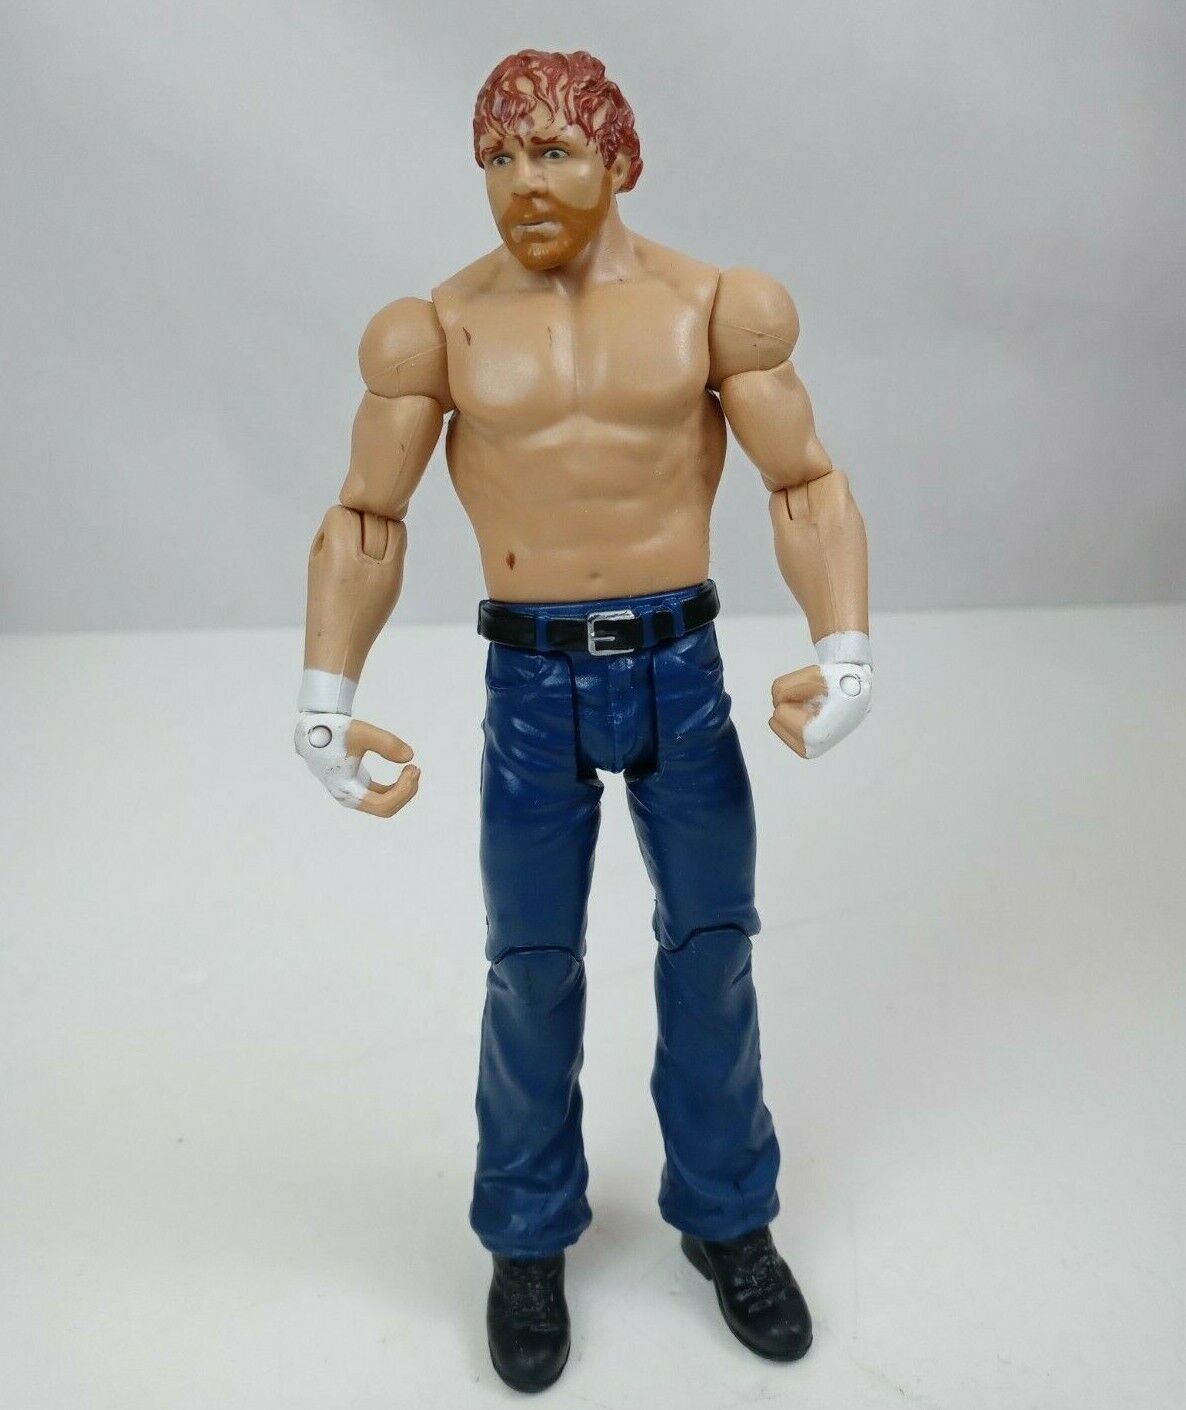 Primary image for 2014 Mattel WWE WrestleMania 34 Dean Ambrose 7" Action Figure (A)